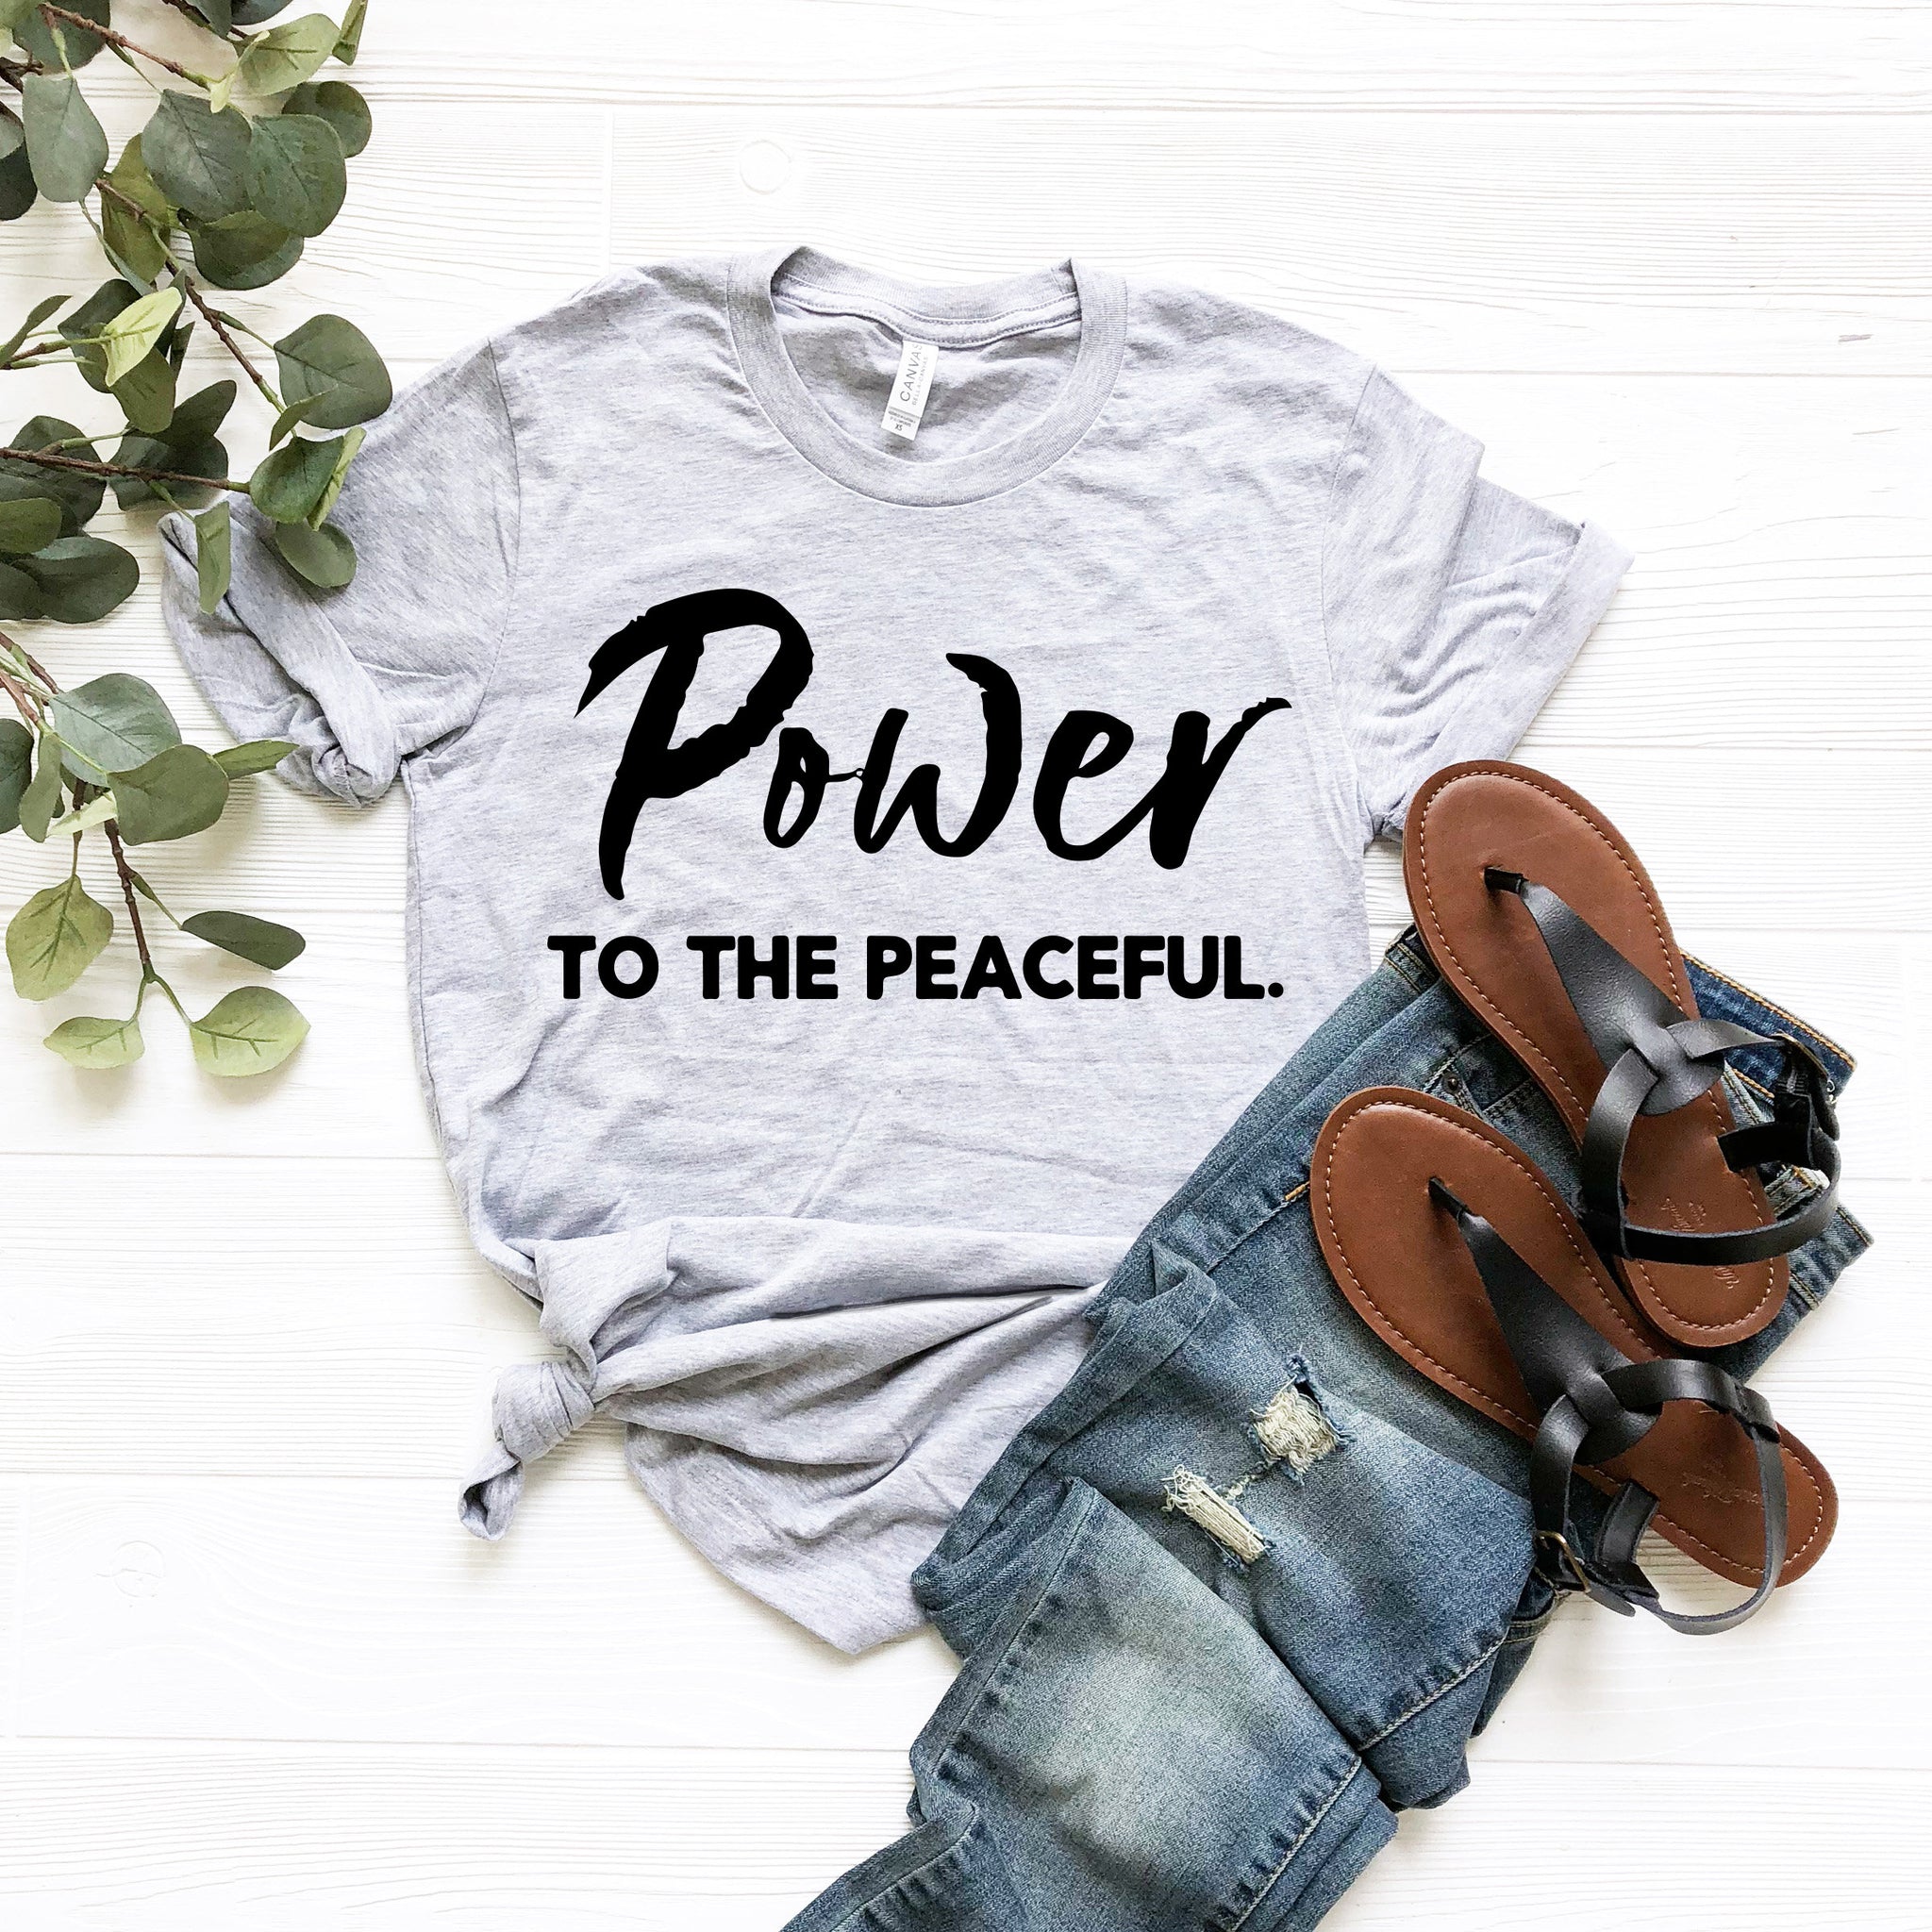 Power to the Peaceful, Christian Apparel, Christian Tees, Christian T-Shirts, Religious Clothing, Jesus Clothing, Faith, Motivational shirt - Fastdeliverytees.com